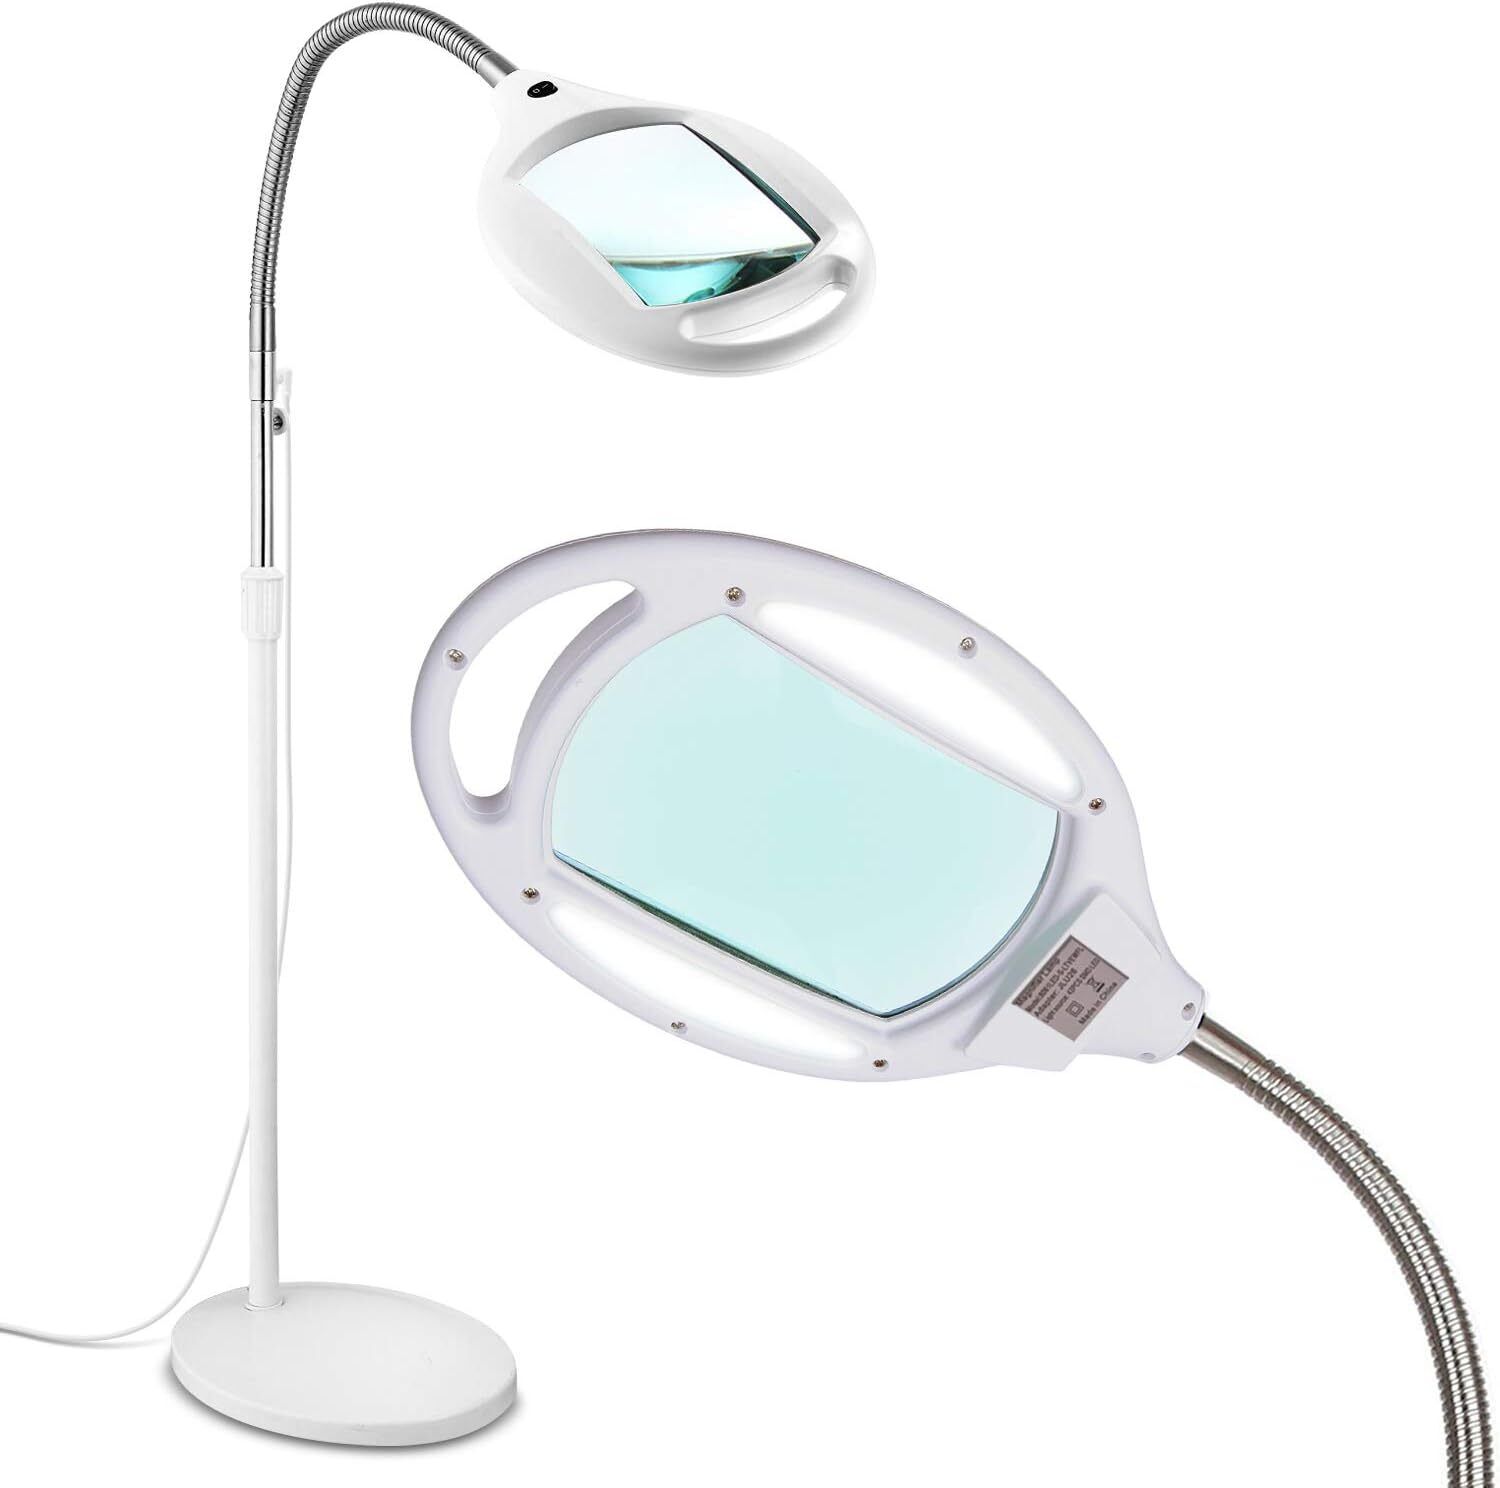 Pro Magnifying Floor Lamp - Hands Free Magnifier with Bright Light for Reading